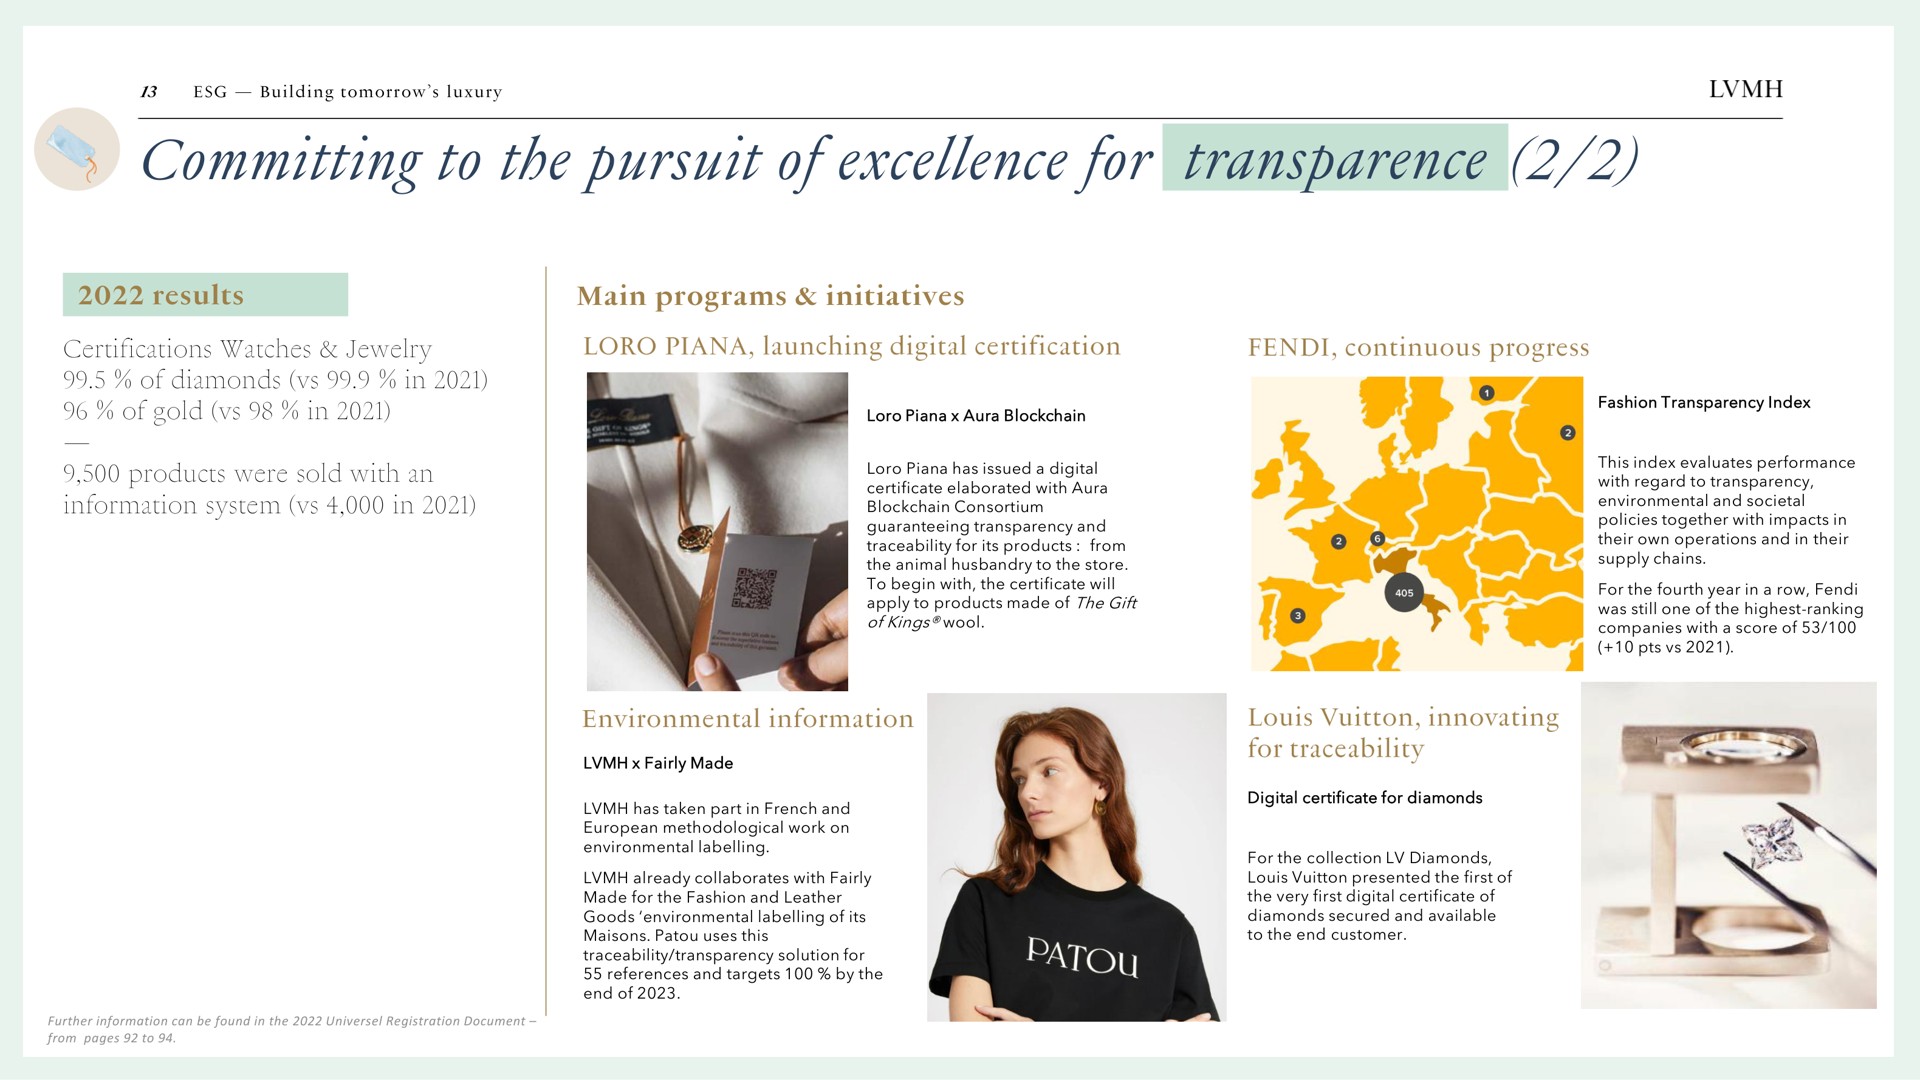 committing to the pursuit of excellence for transparence | LVMH